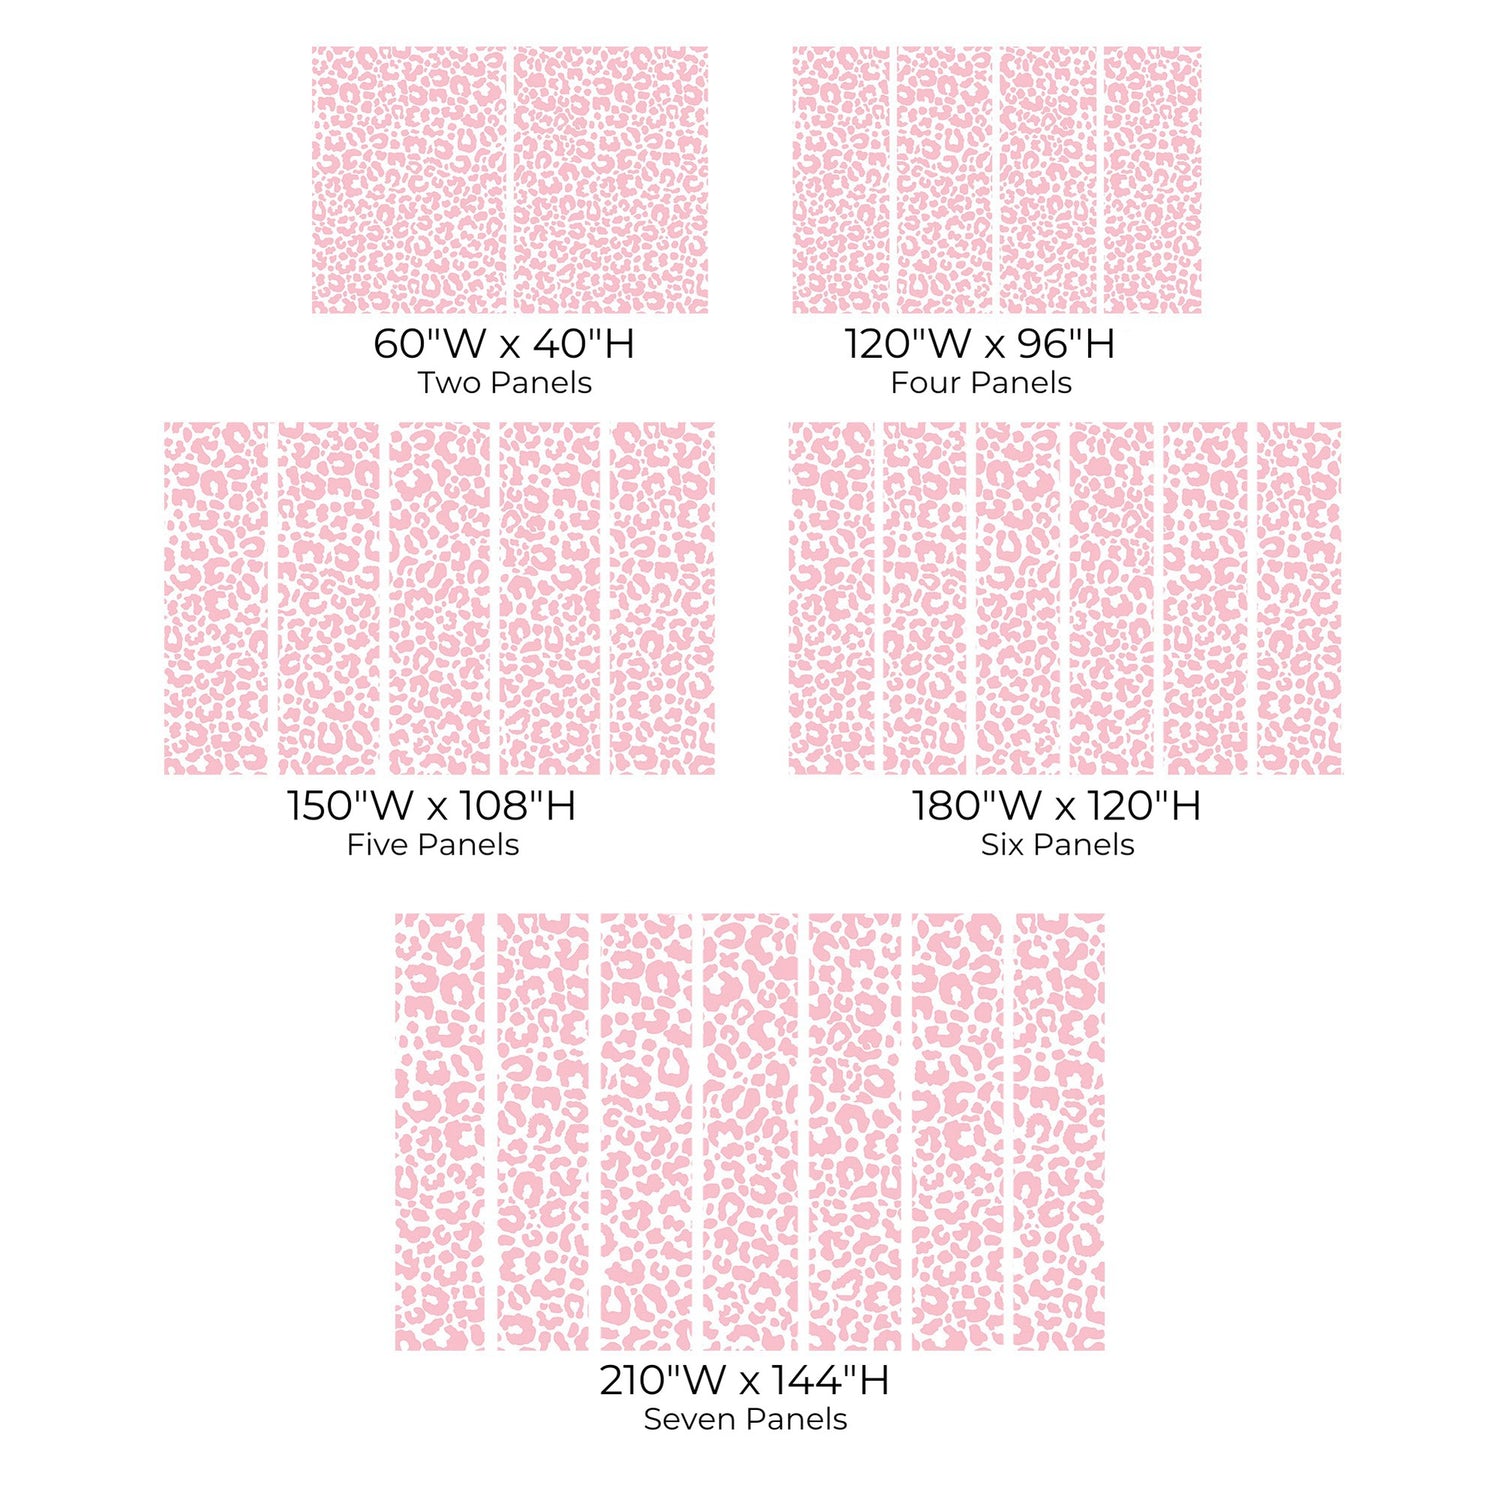 Various size options for a pink pattern wall mural displayed in a grid format